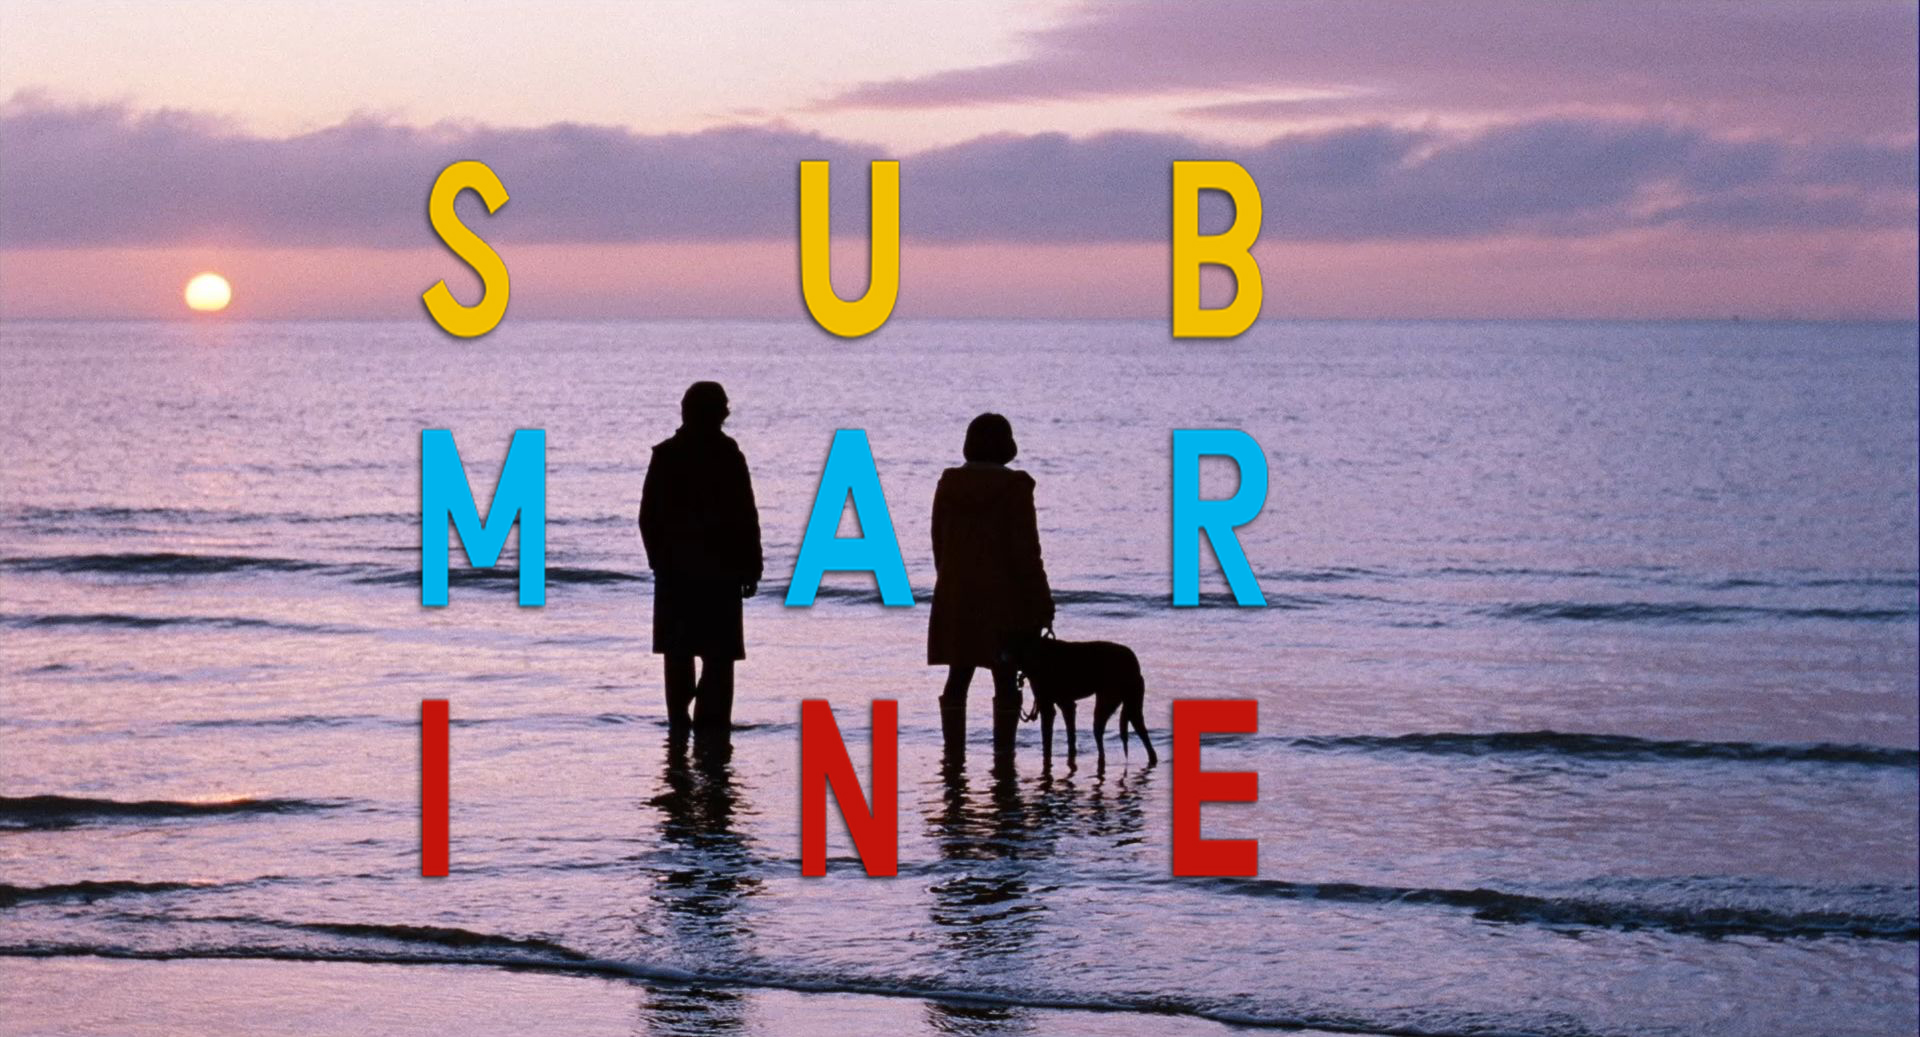 name of popular movie about a lost submarine